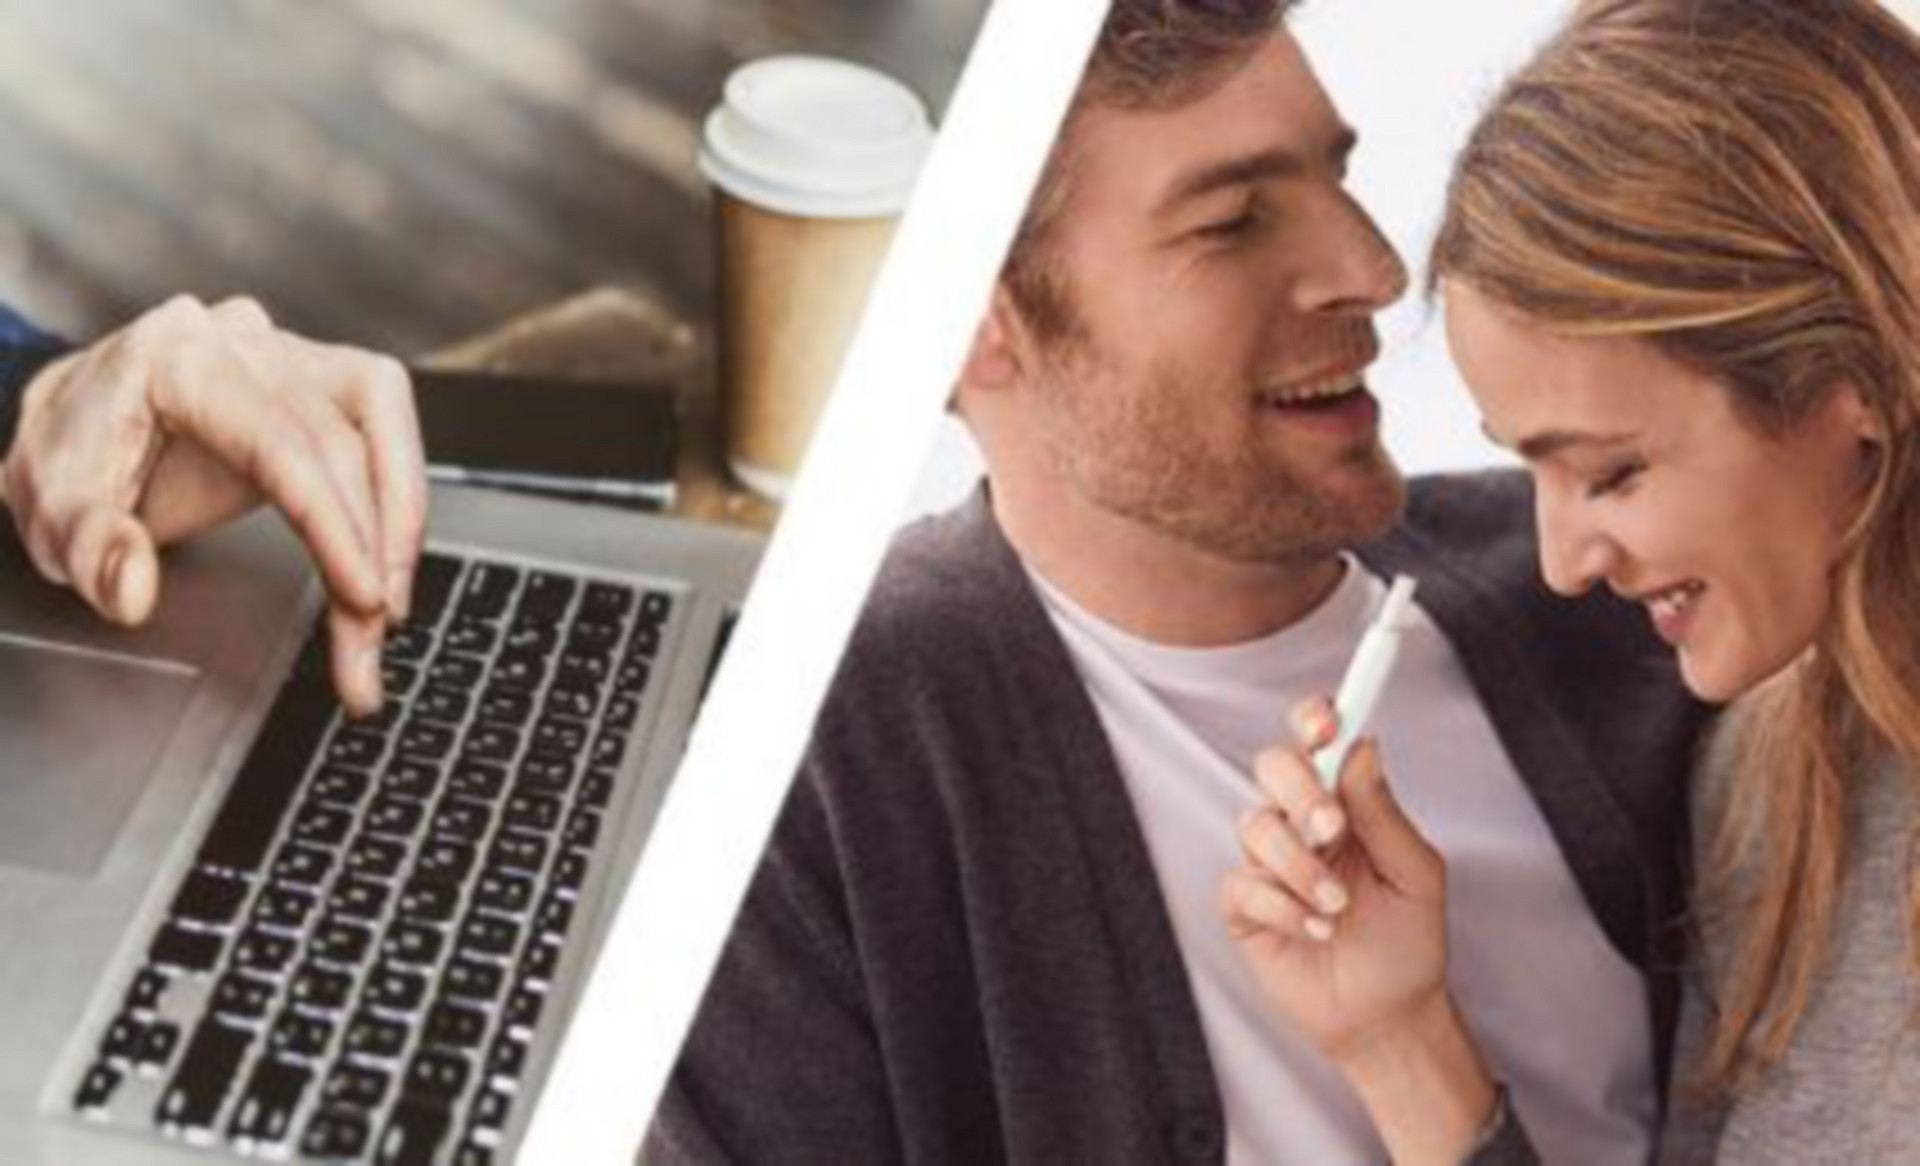 A split image of a person working on a laptop and a couple laughing, the woman in the couple is holding an IQOS device